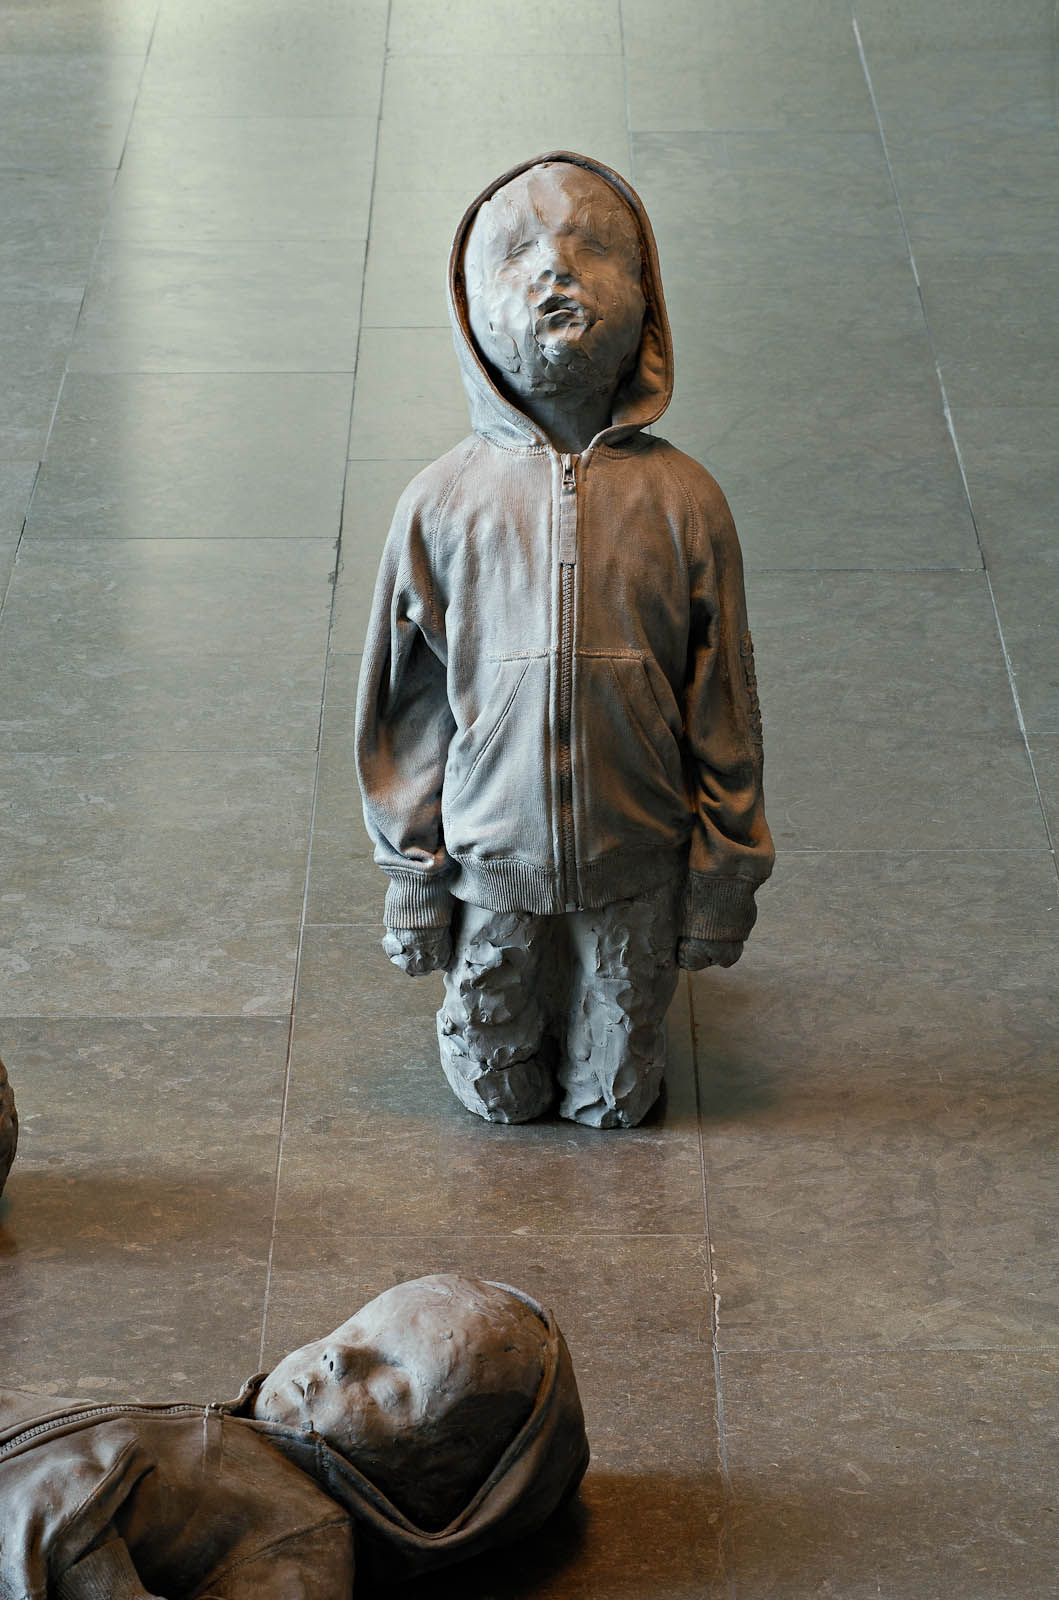 A child wearing a hood, on is knees looking upwards.